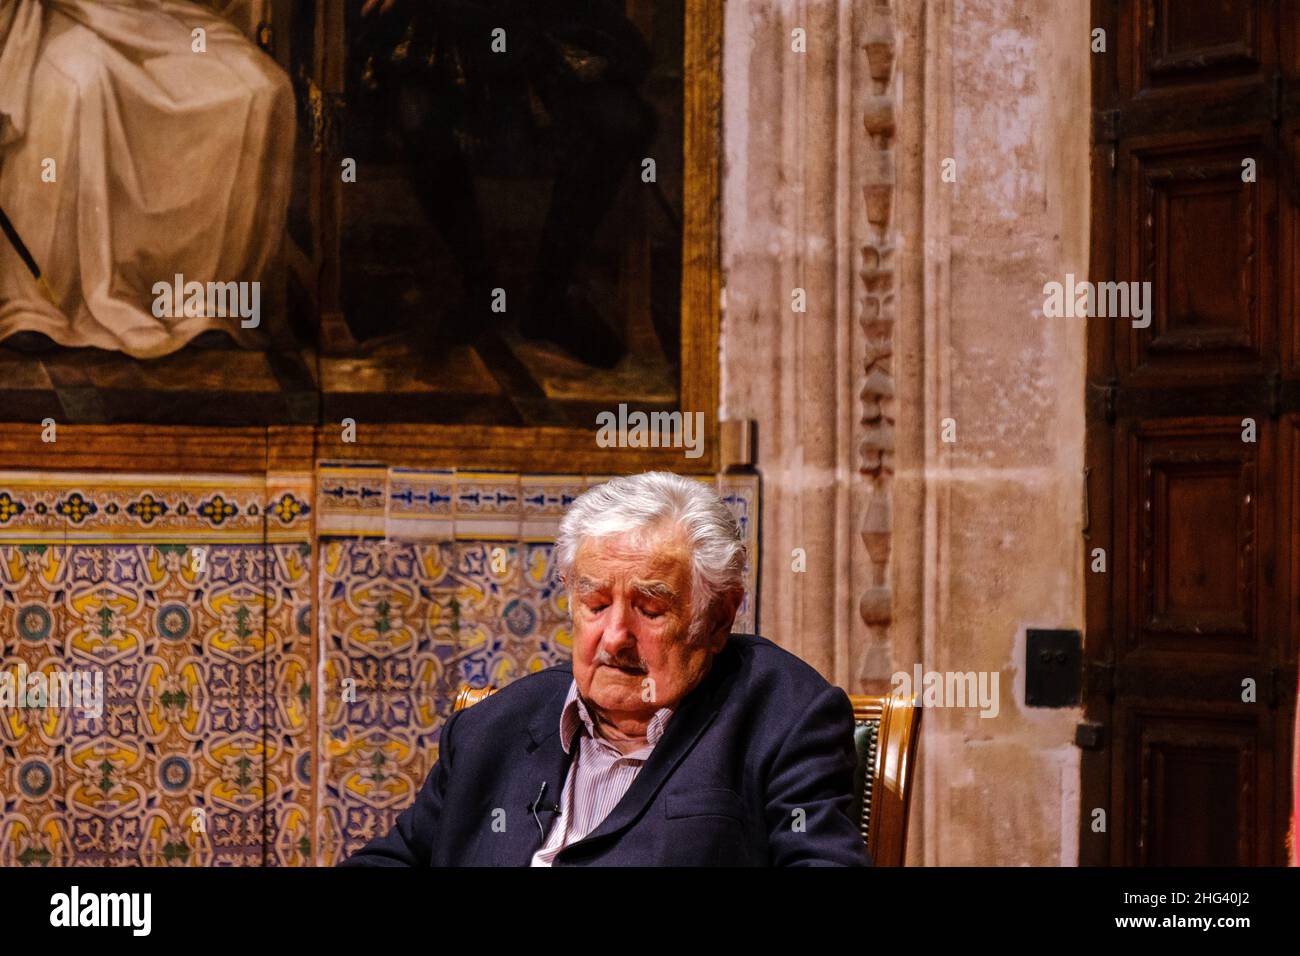 Valencia, Spain; 4th February 2020: The former President of Uruguay José Mujica is invited to the Palau de la Generalitat Valenciana during his visit Stock Photo